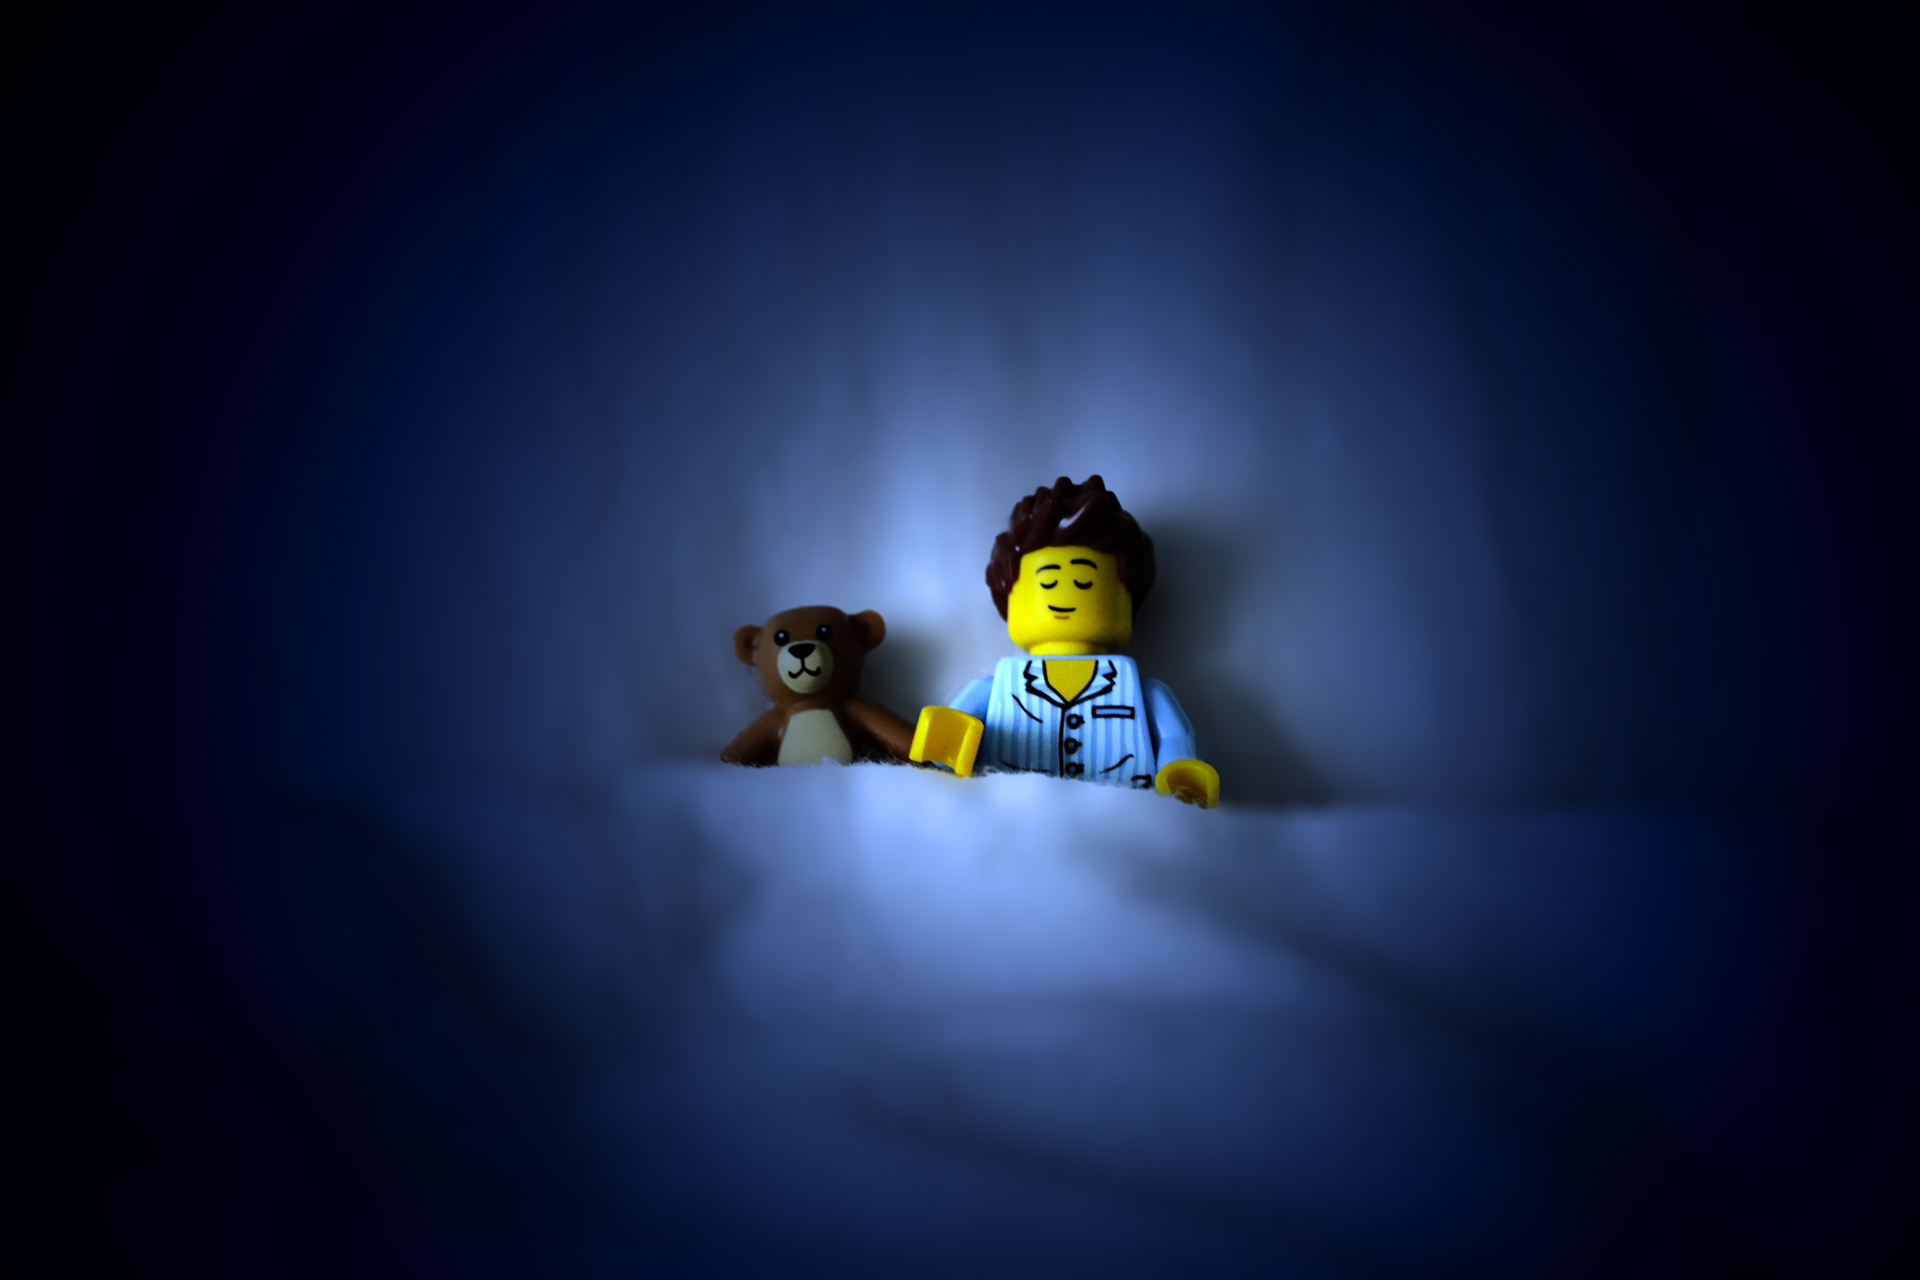 The Lego Wallpapers HD Wallpapers Pulse 1920x1280